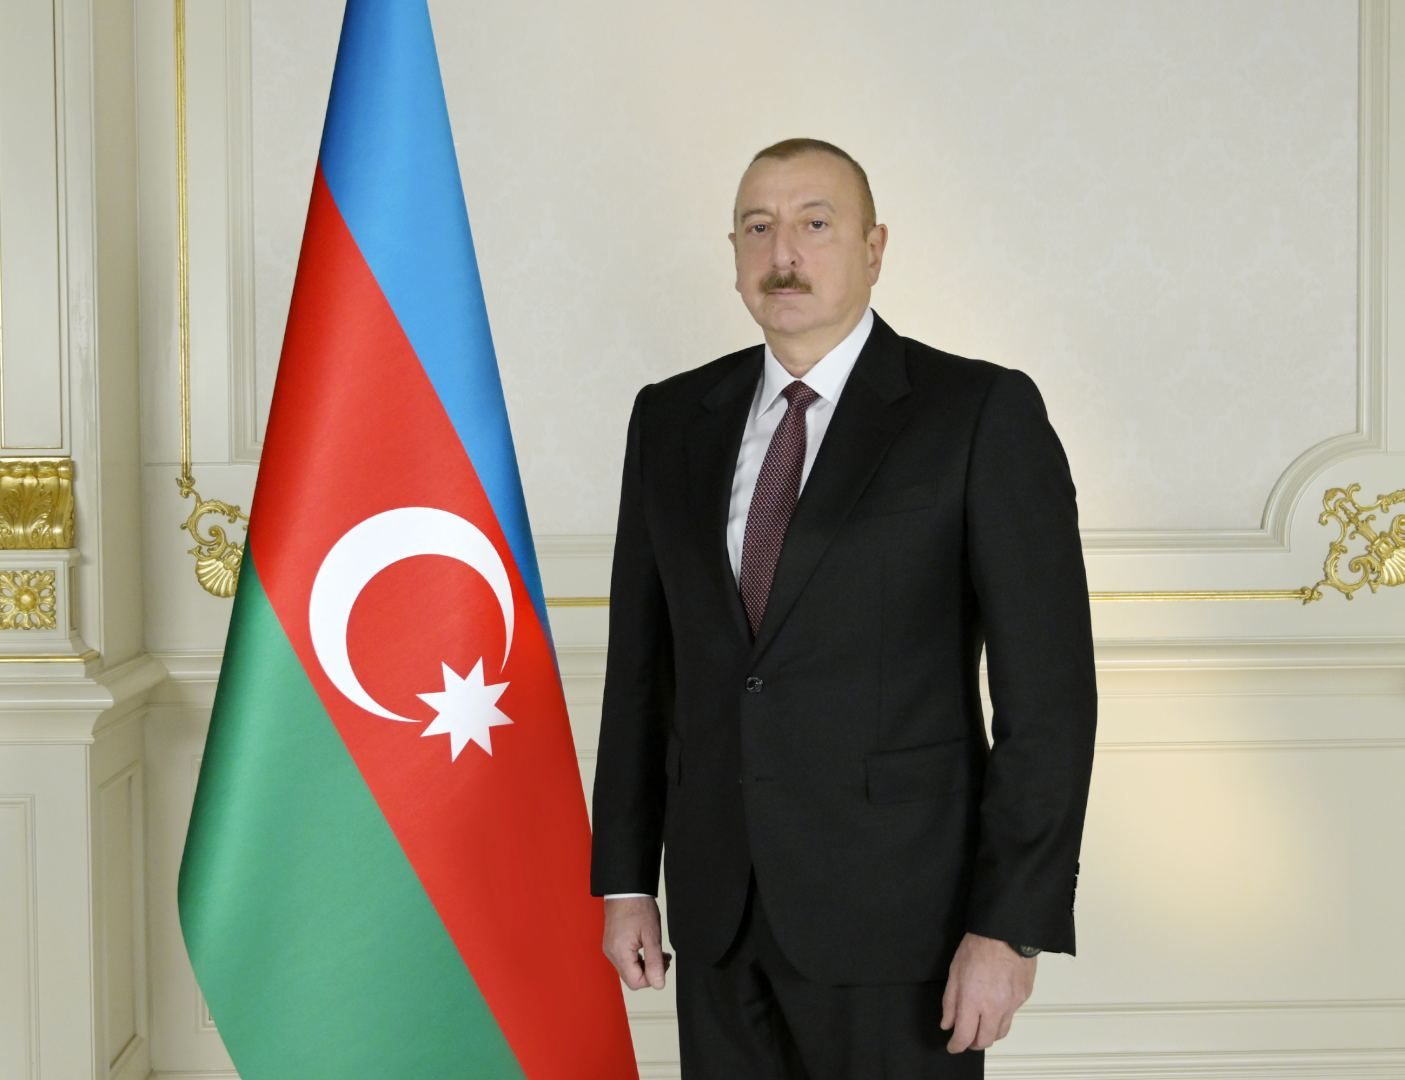 Today, there are ample opportunities to take cooperation between Azerbaijan and Indonesia to next level - President Ilham Aliyev